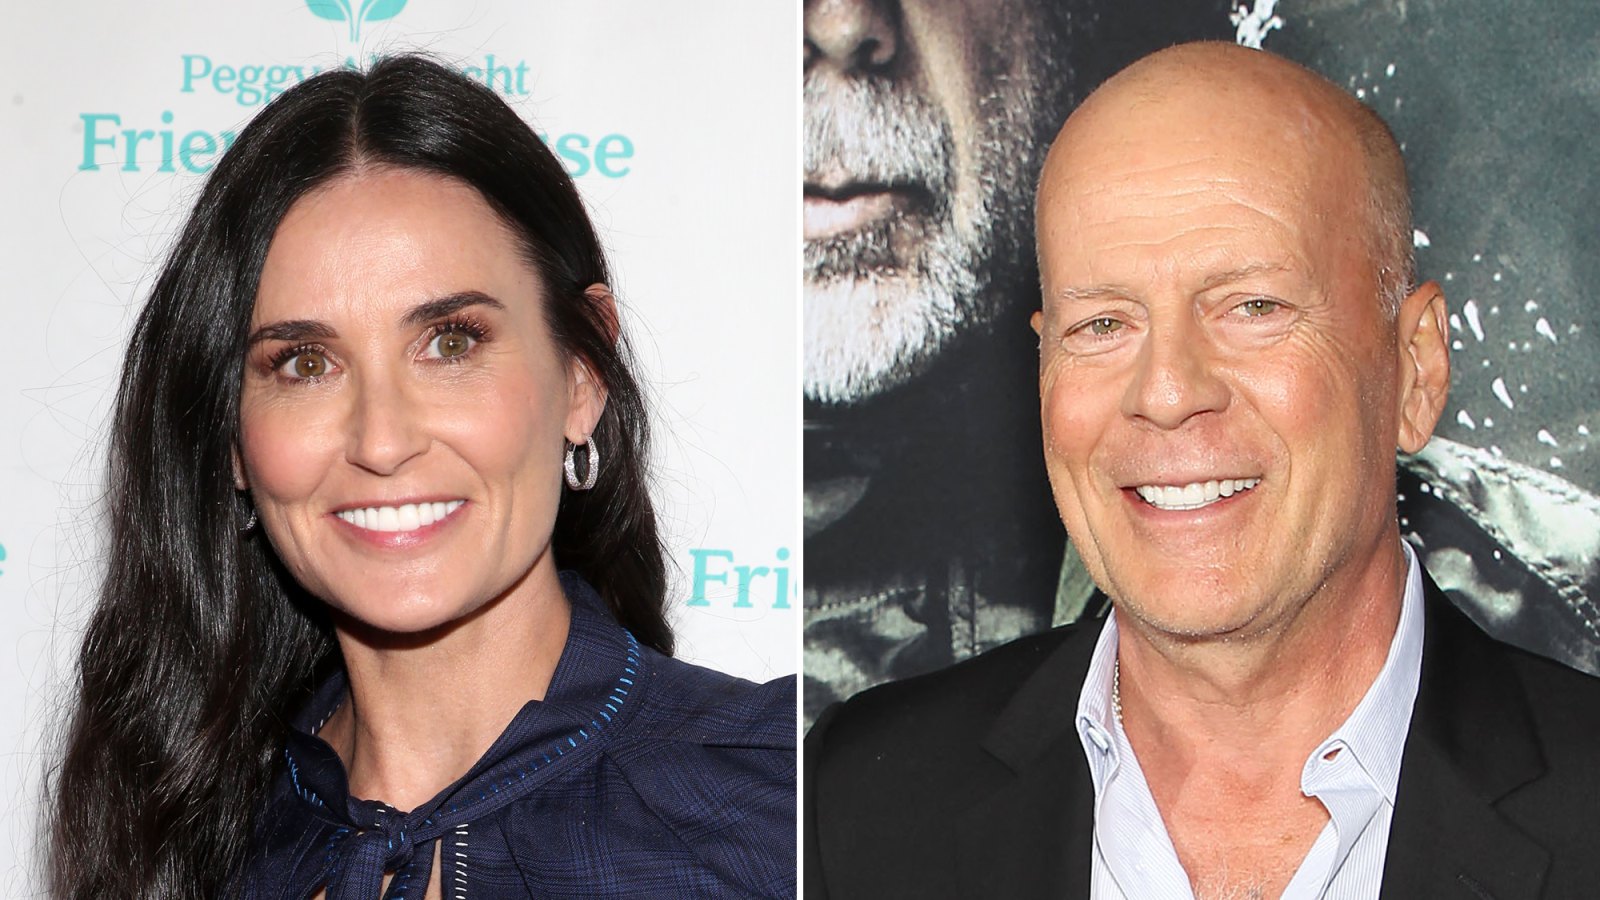 emi Moore Wishes Her Ex-Husband Bruce Willis a Happy Birthday With Throwback Family Photo